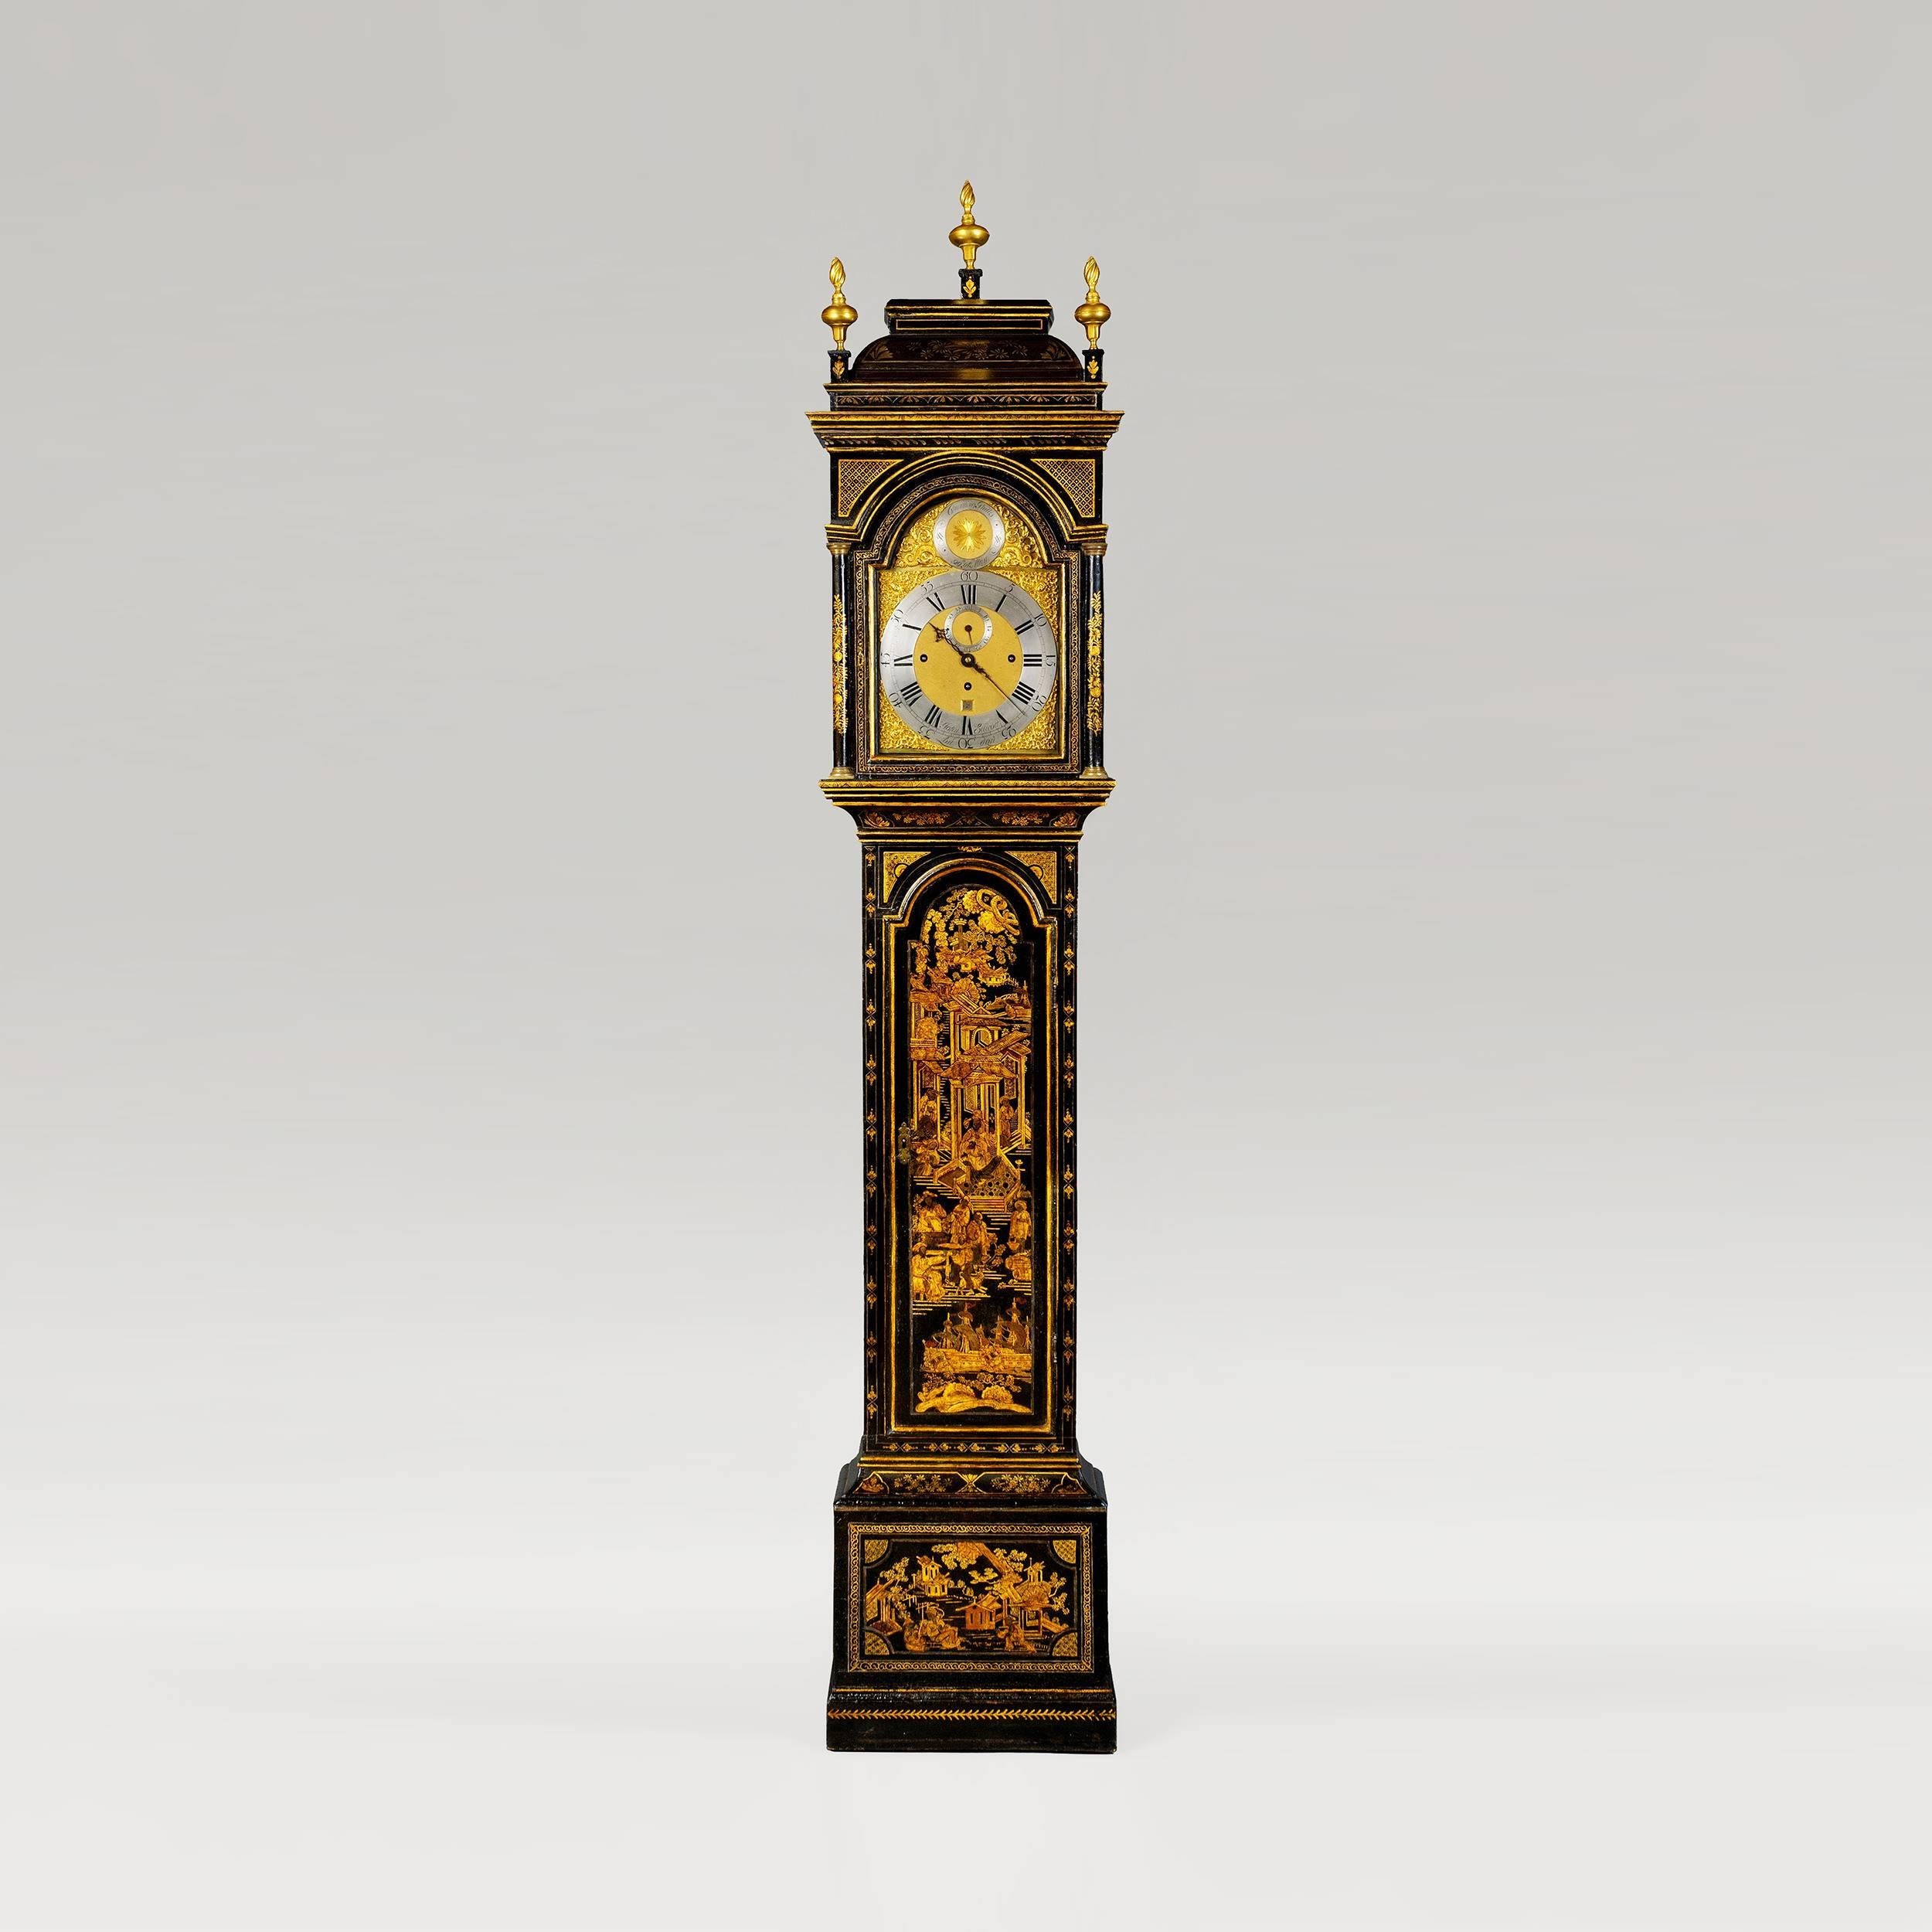 A Longcase Clock with a Musical Movement 
by John Ellicott, Clockmaker to King George the Third

Housed within a Chinoiserie lacquered case, having an inspection door, the domed top with brass flambeau finials, the hood housing the John Ellicott